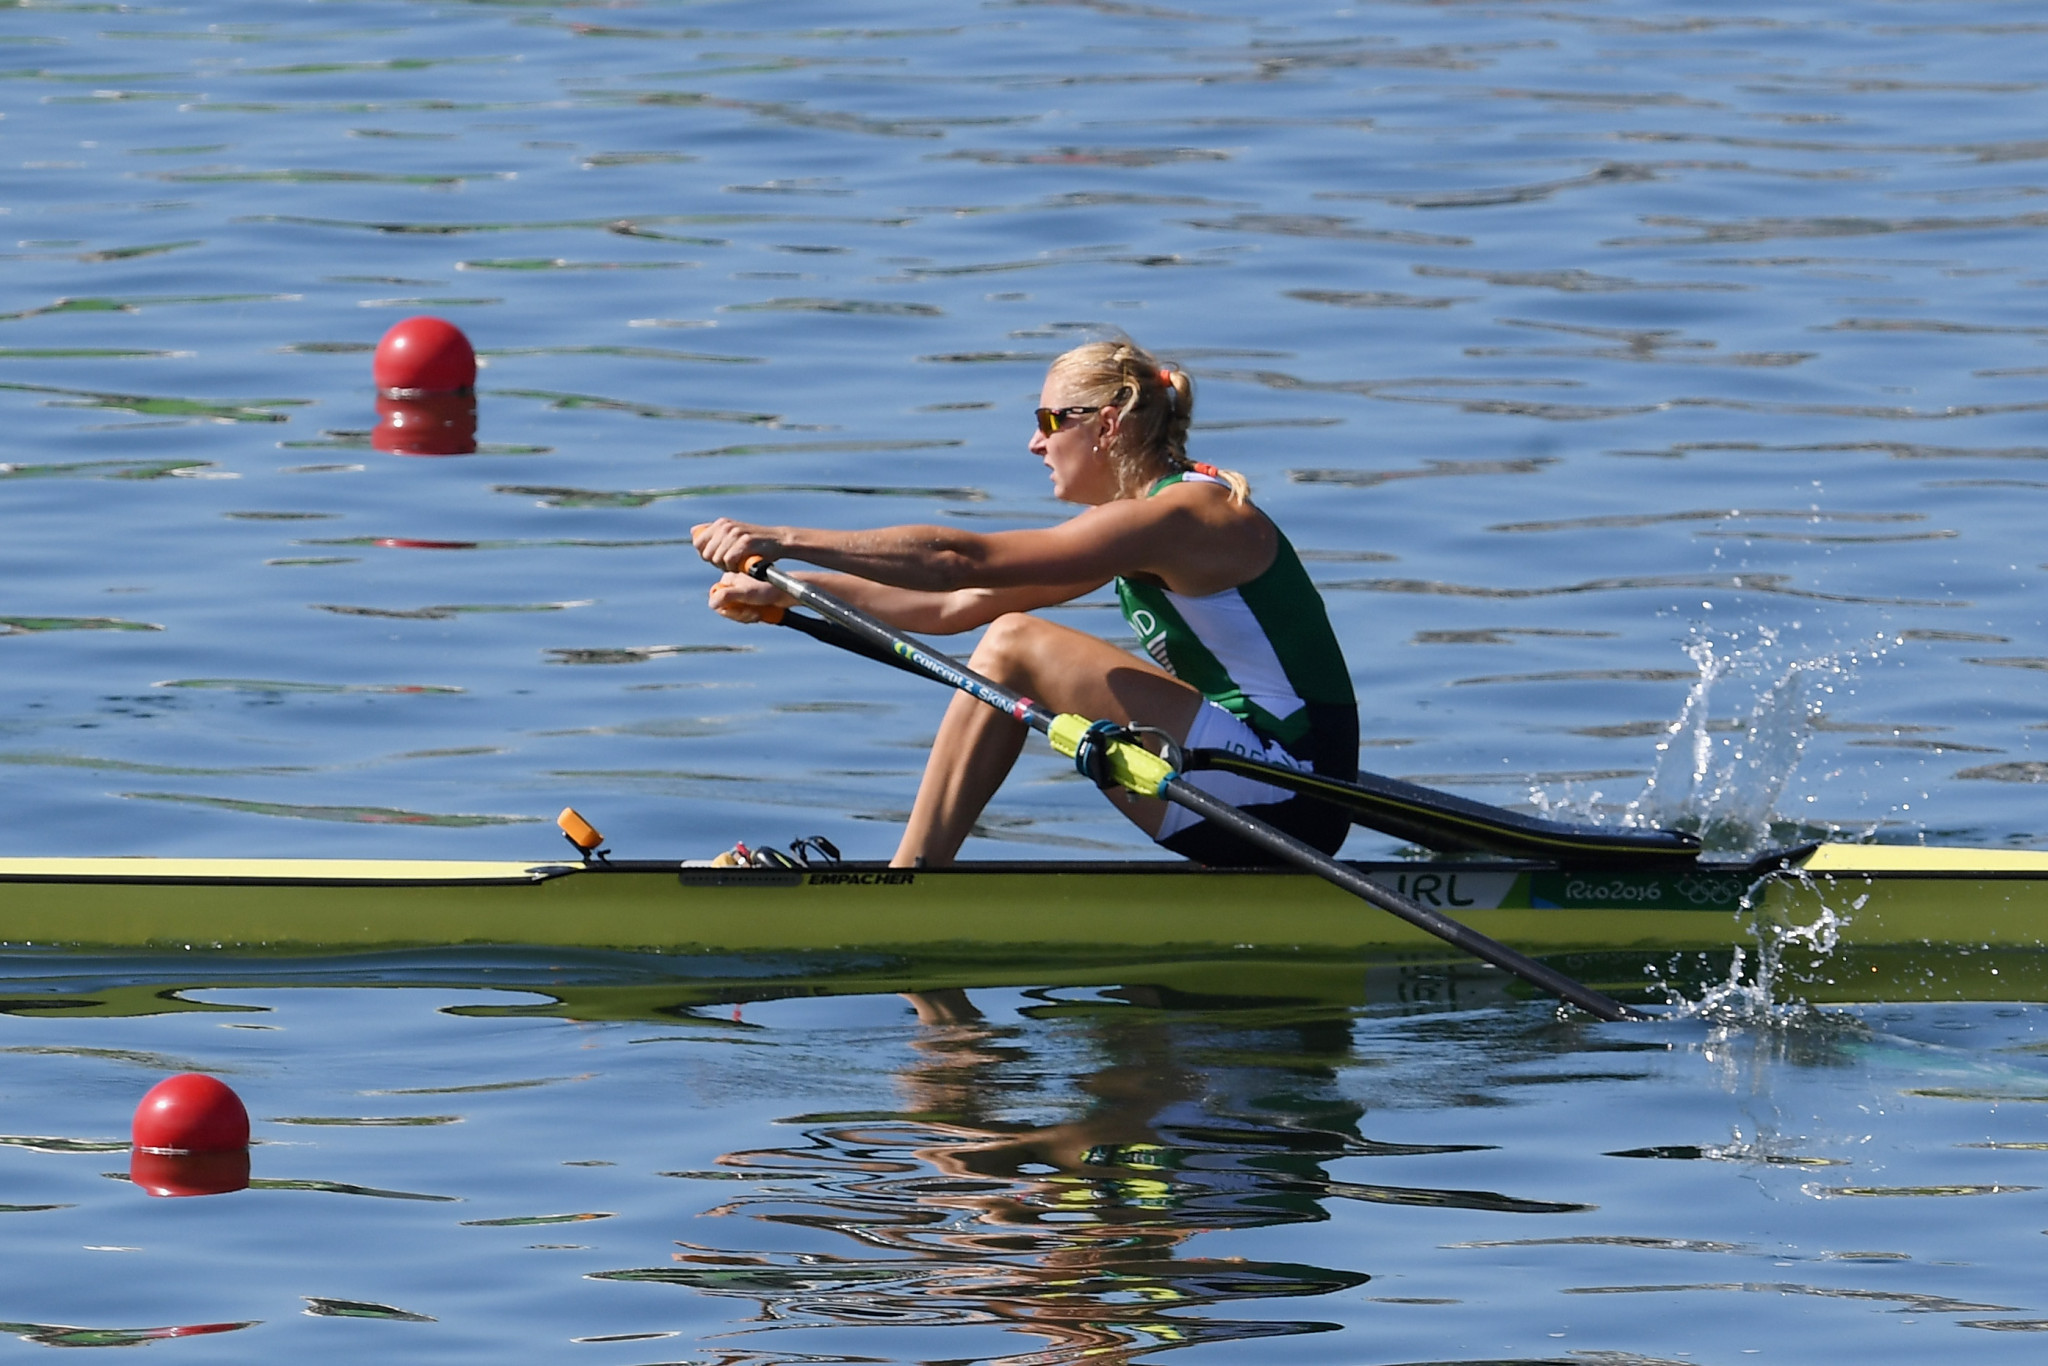 Ireland's Sanita Puspure is in contention for the women's crew of the year award ©Getty Images